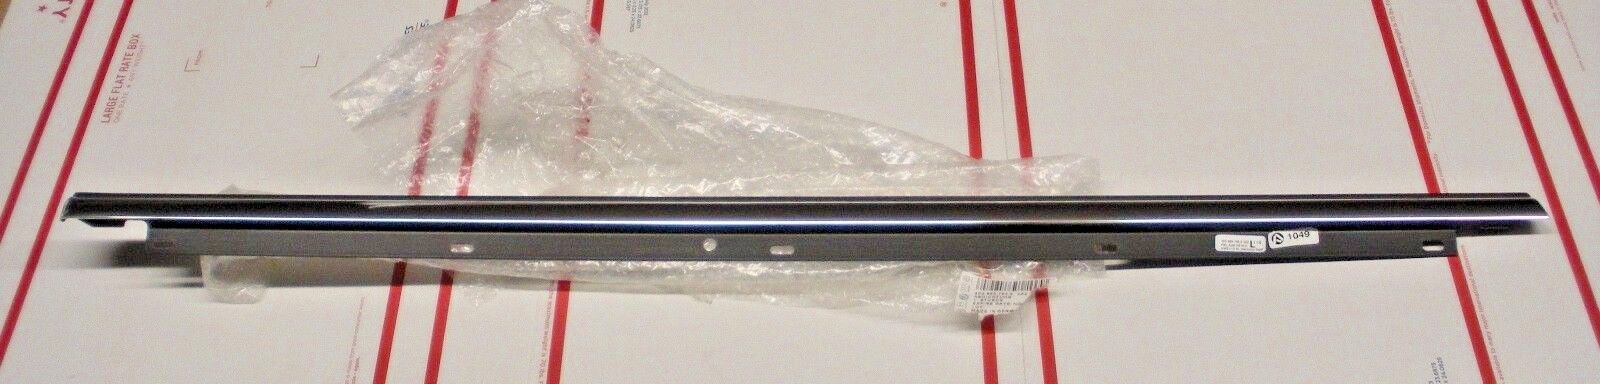 New Other (see Details) Audi Oe Belt Molding Window Weatherstrip Fits